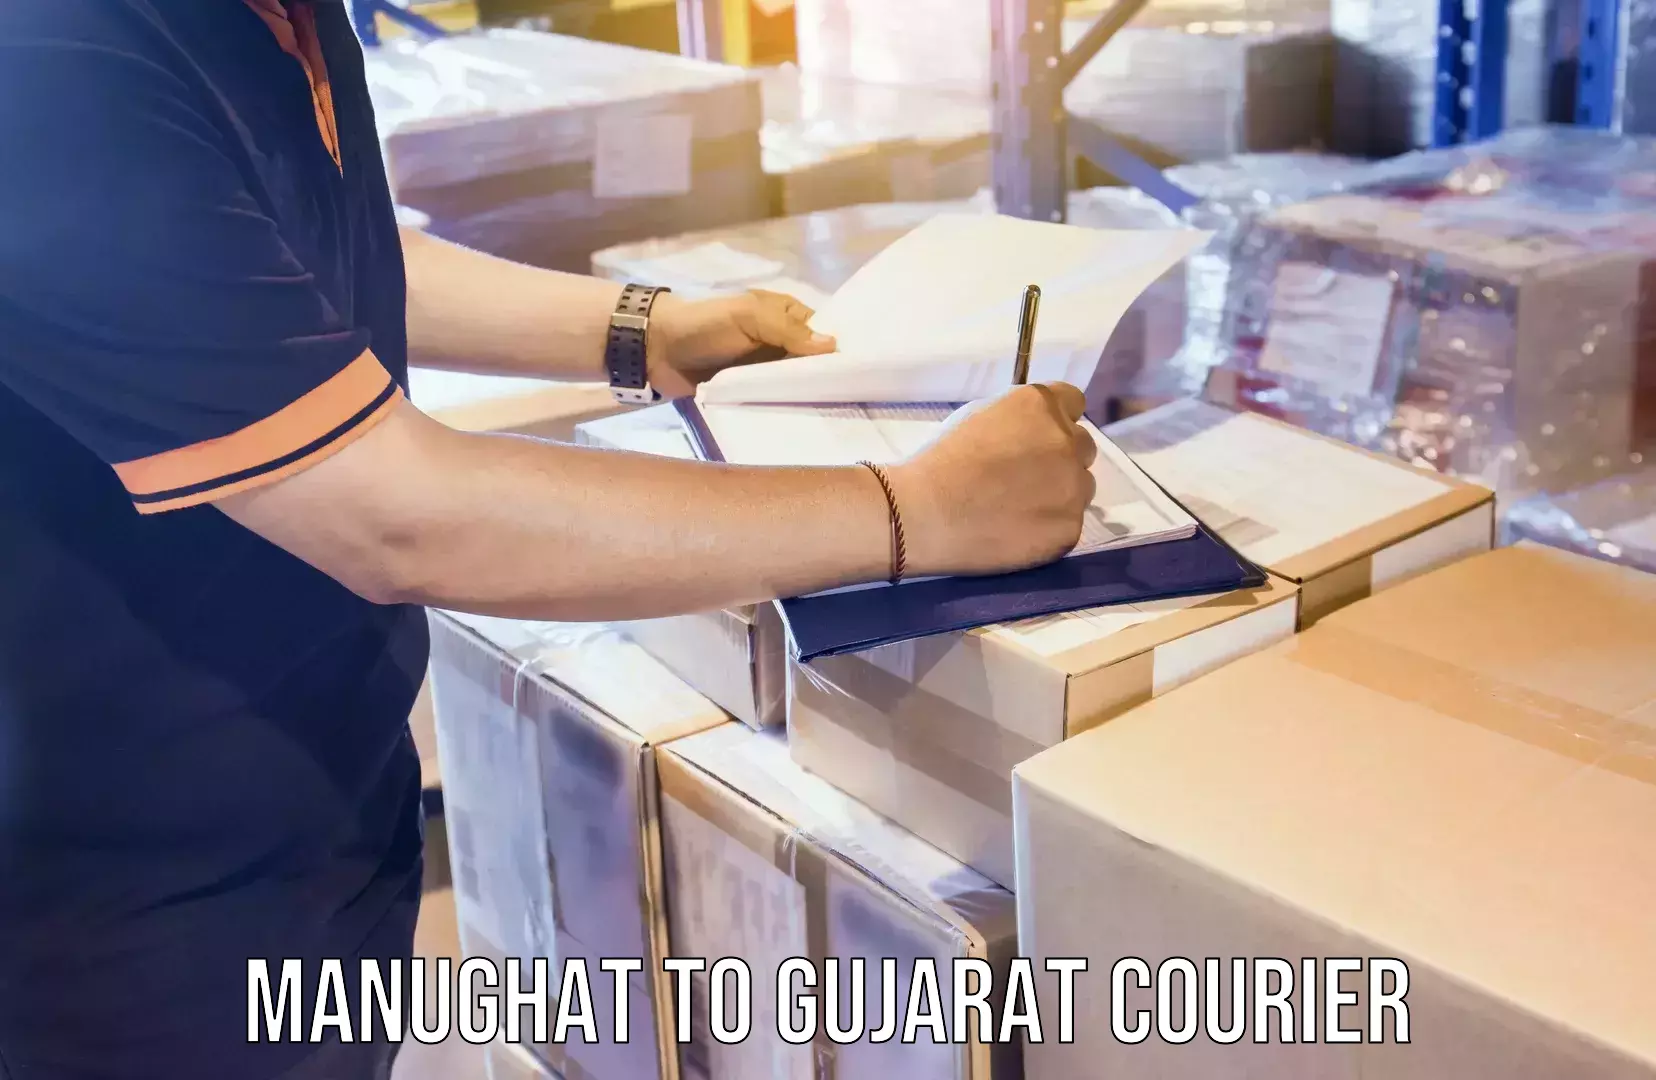 Next-day delivery options Manughat to Gujarat